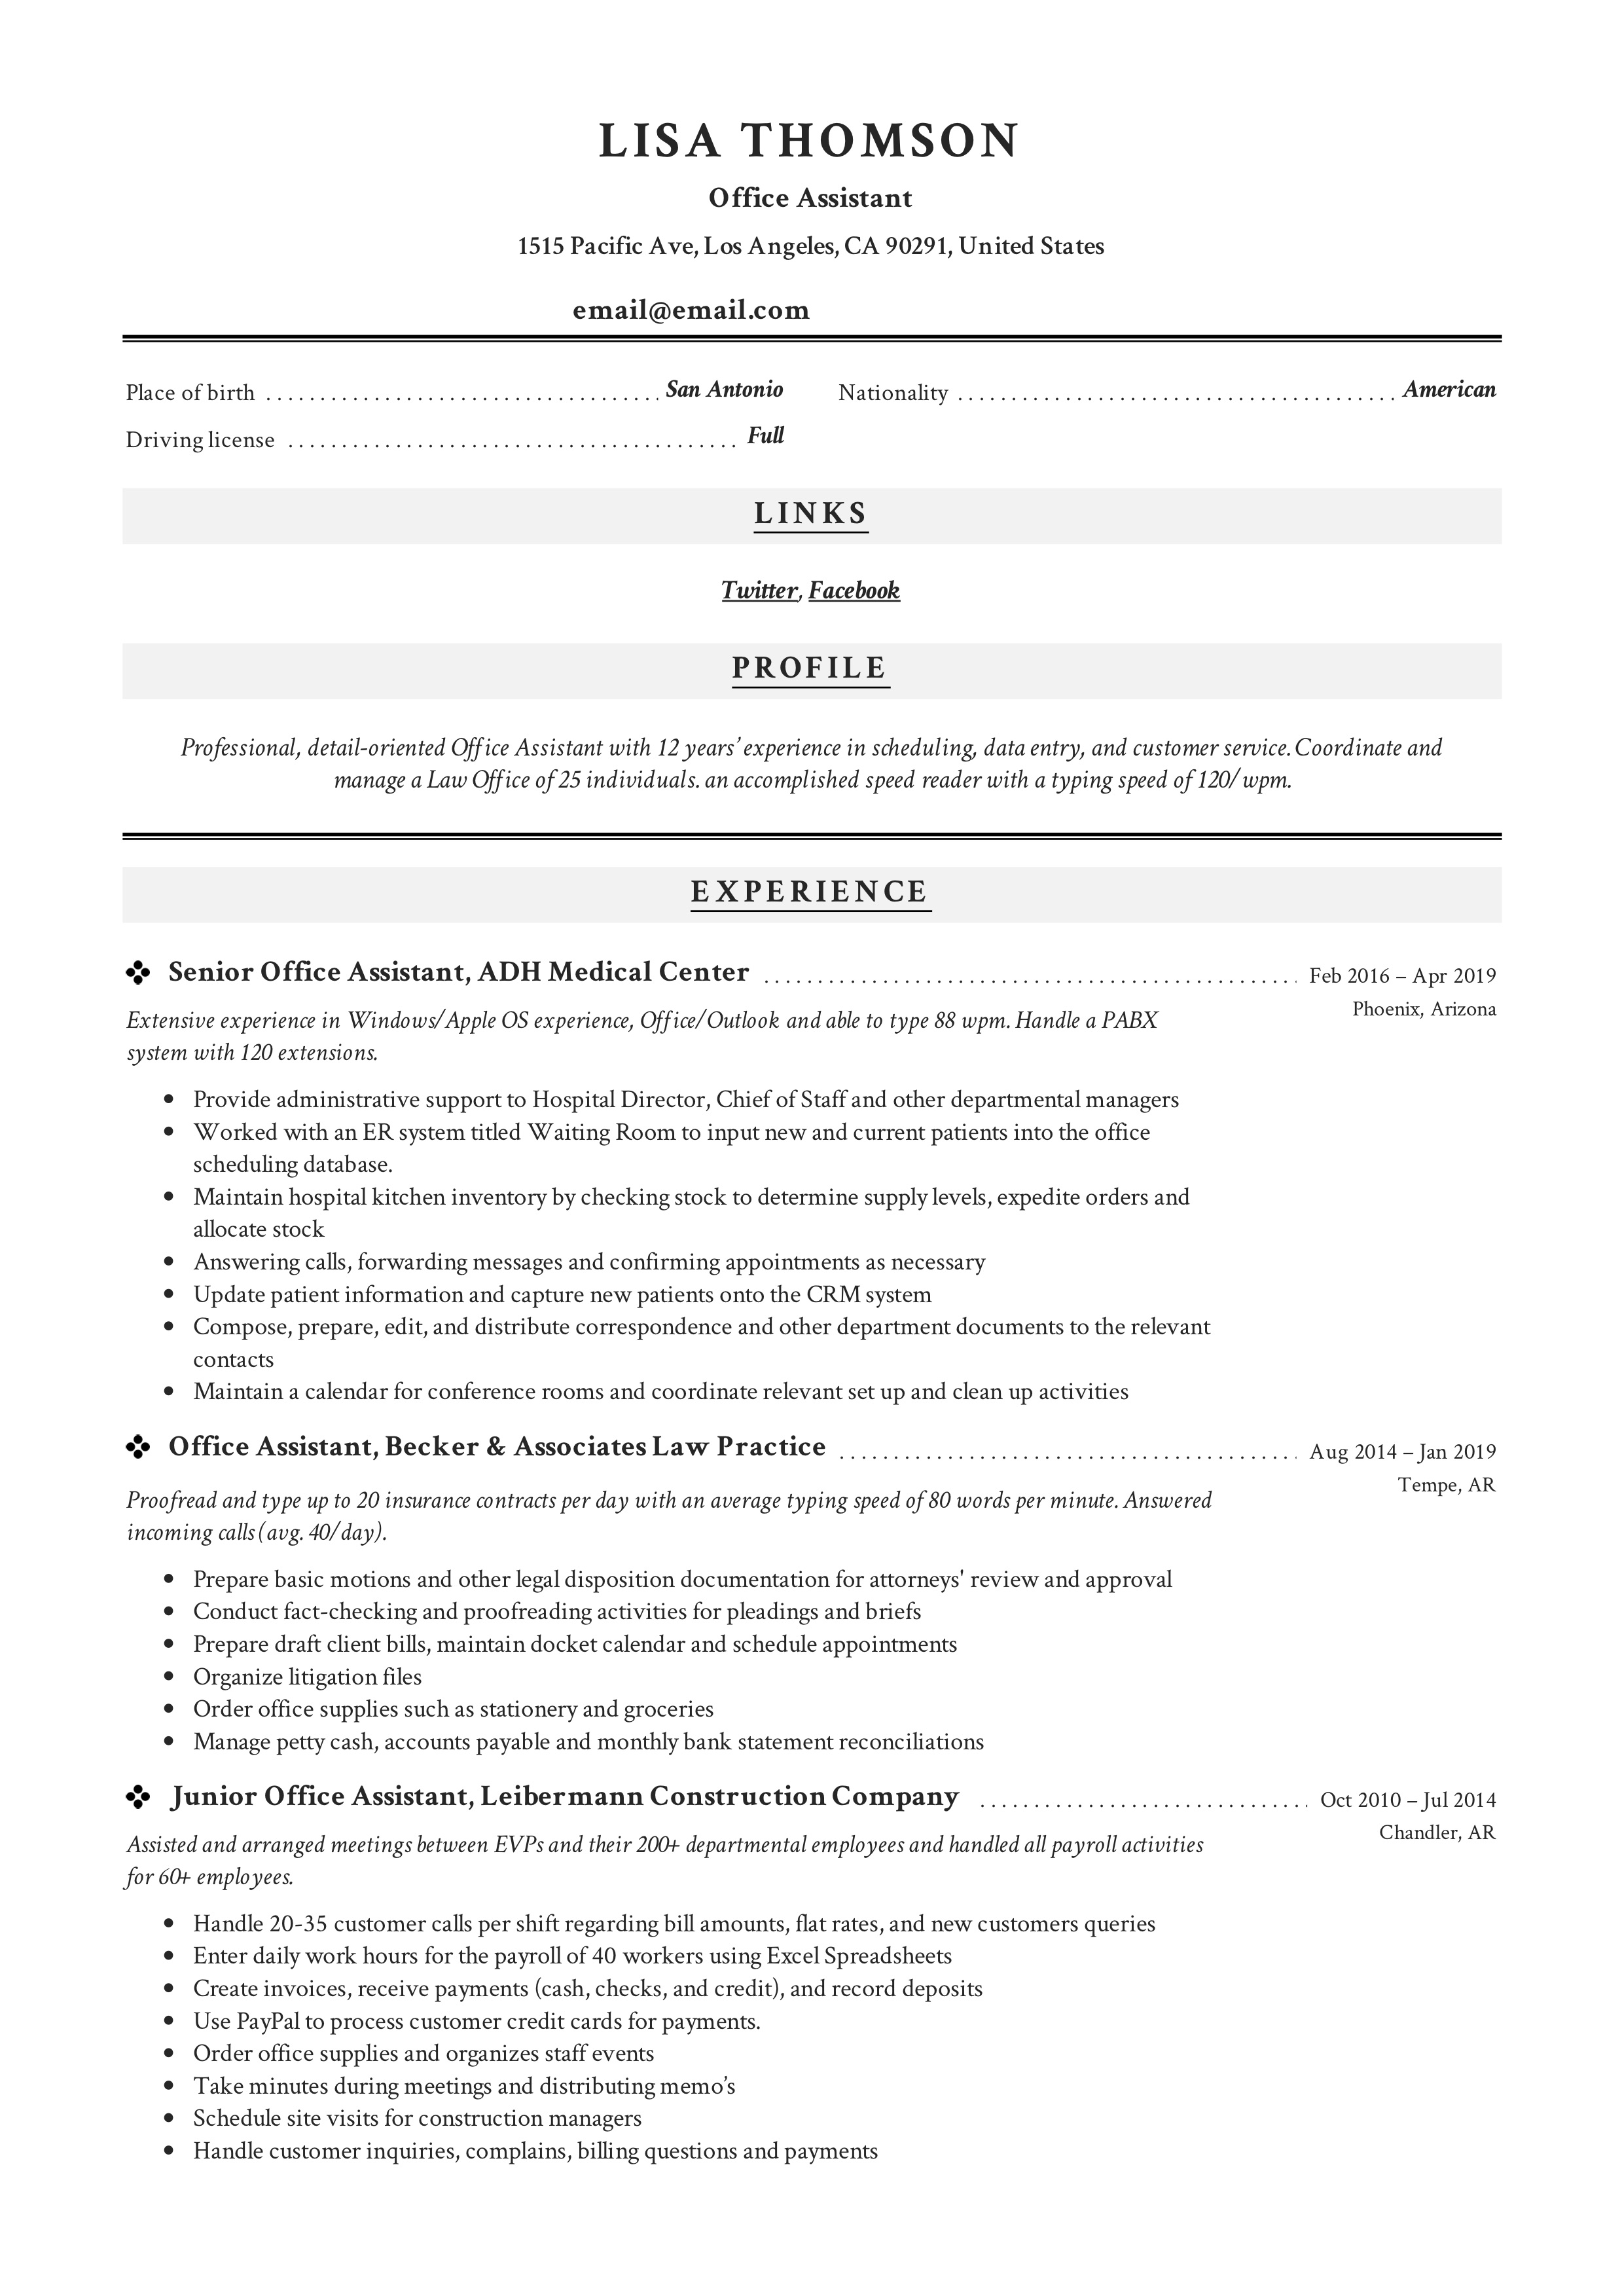 Office Assistant Resume + Writing Guide  12 Resume TEMPLATES  2019